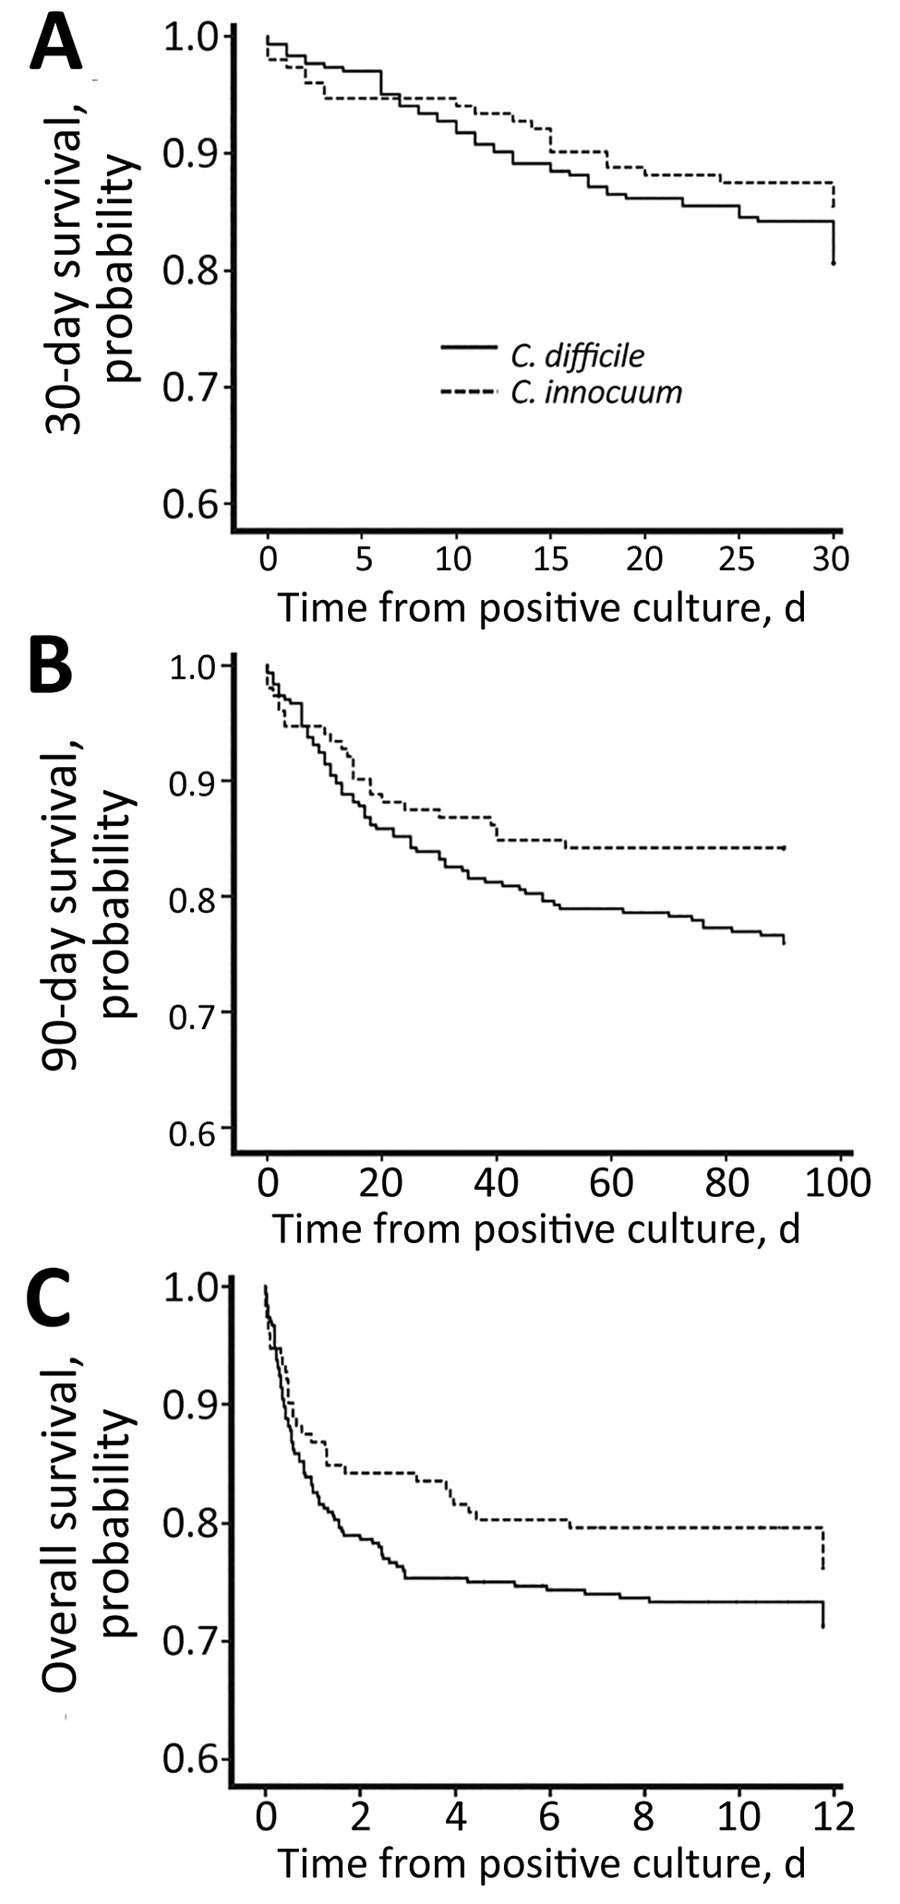 Kaplan-Meier curve of 30-day (A), 90-day (B), and overall (C) survival rates of patients with Clostridioides difficile and Clostridium innocuum, Taiwan. In the C. innocuum group, the 30-day survival rate was 85.5%, 90-day survival rate 84.2%, and overall survival rate 77.0%. The 90-day survival rate was slightly higher than the C. difficile group (p value of log rank test = 0.05), whereas the 30-day and overall survival rates did not show a significant difference between the 2 groups.